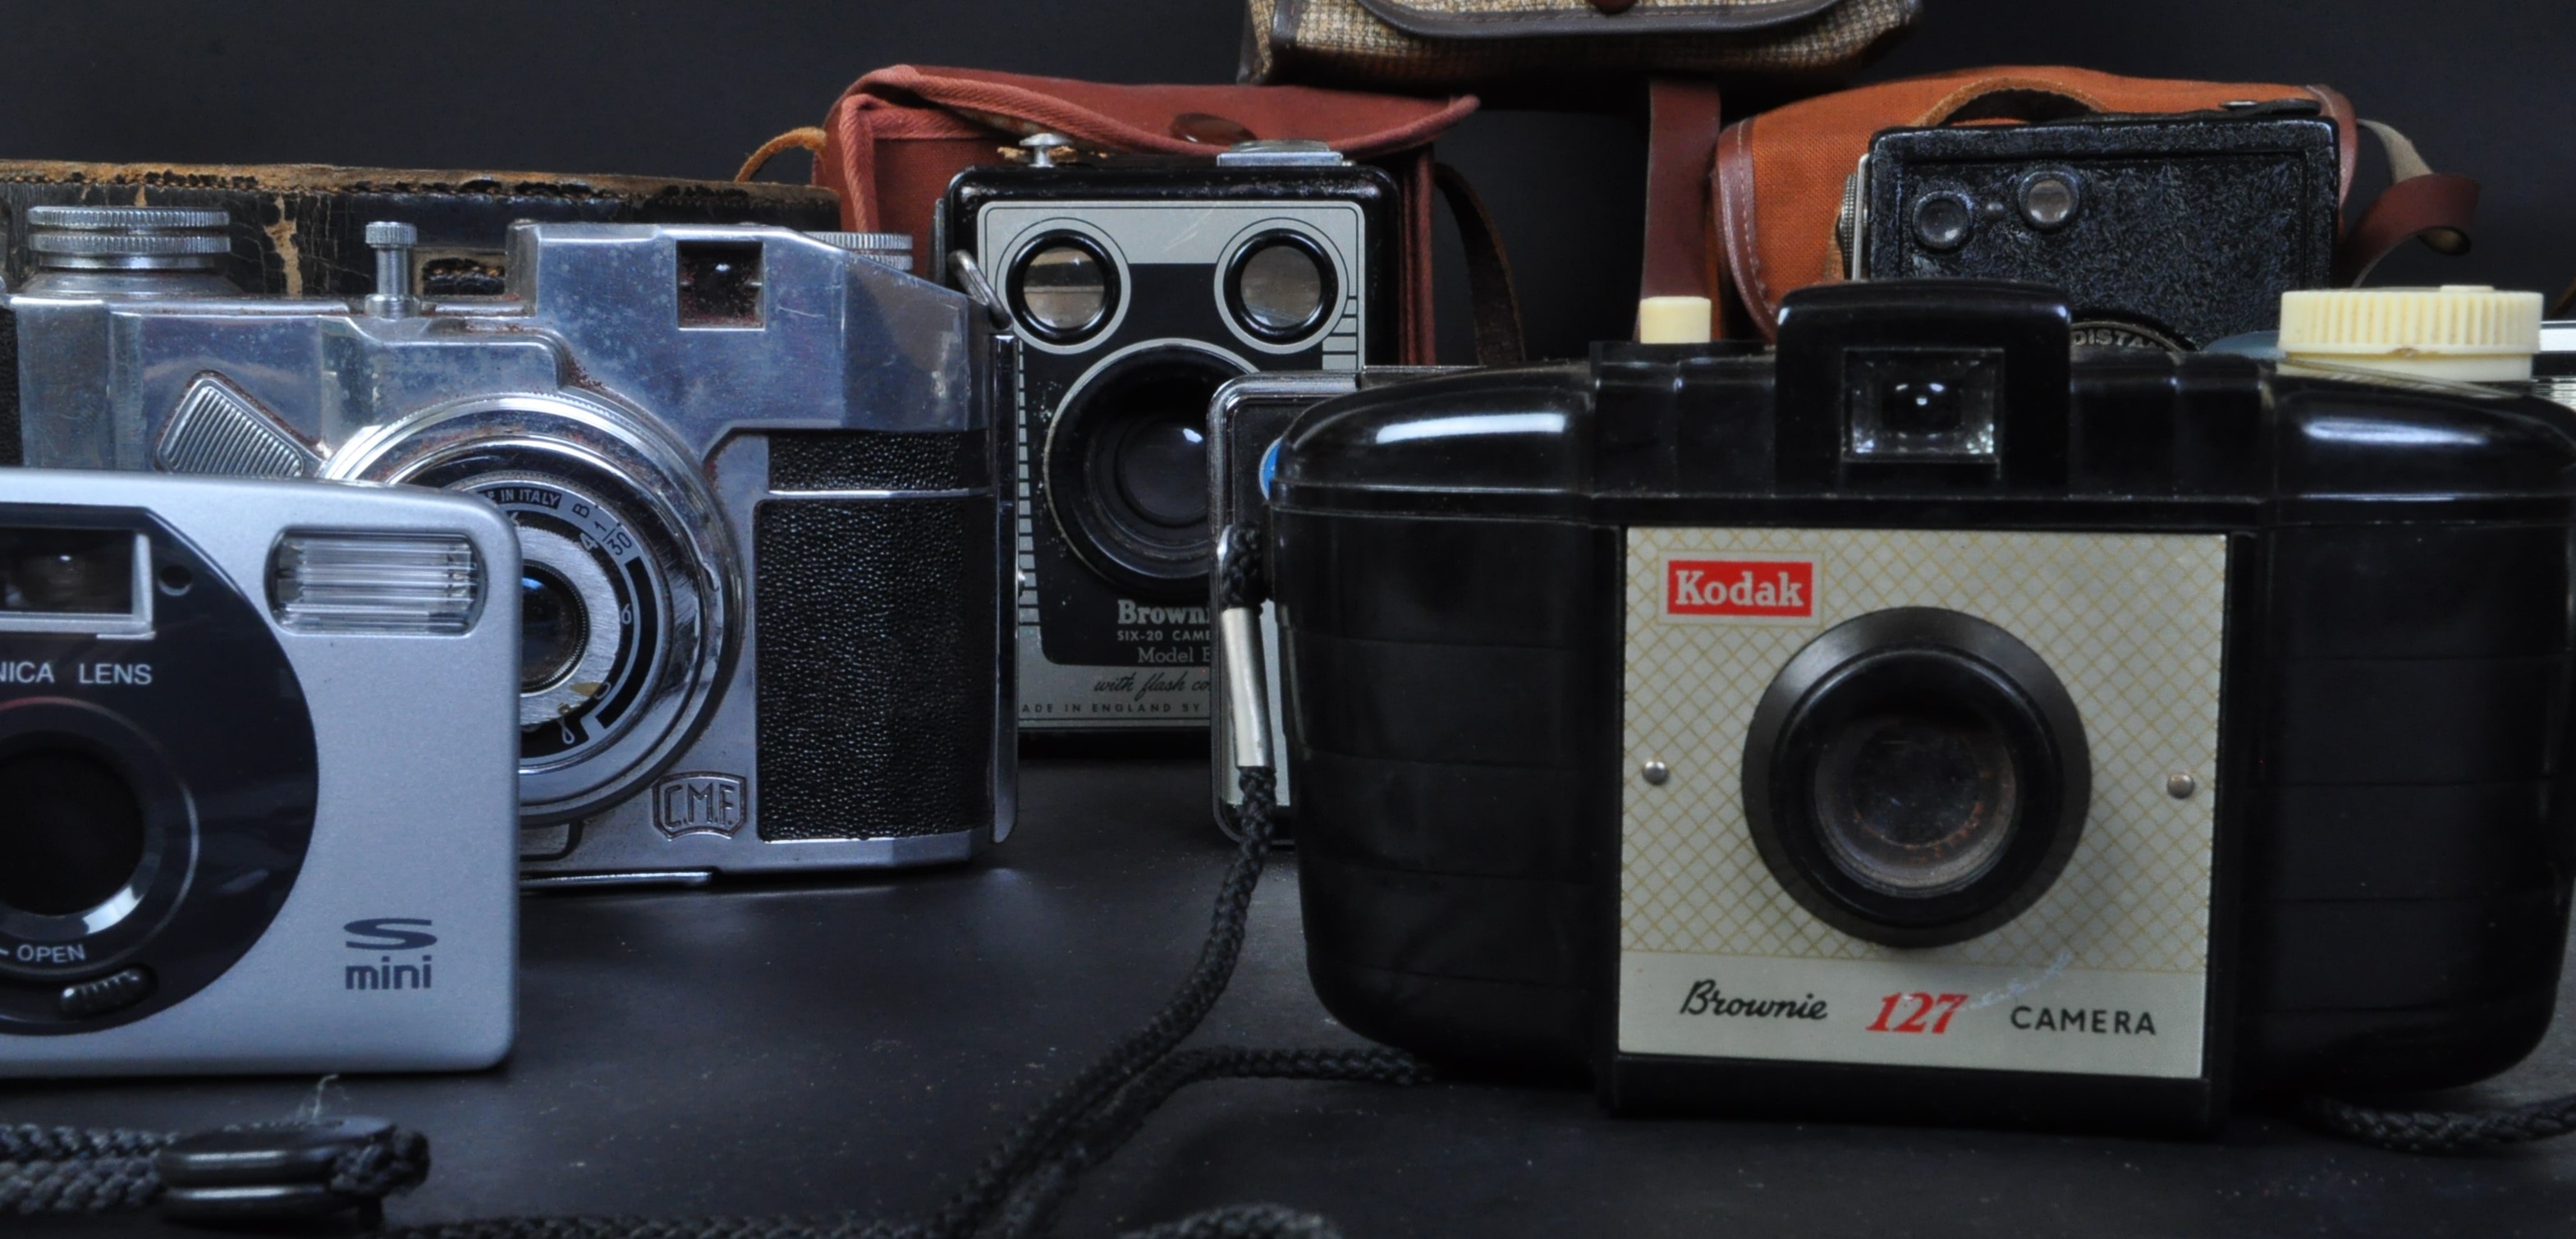 COLLECTION OF VINTAGE CAMERAS - KODAK - CANON - Image 4 of 5